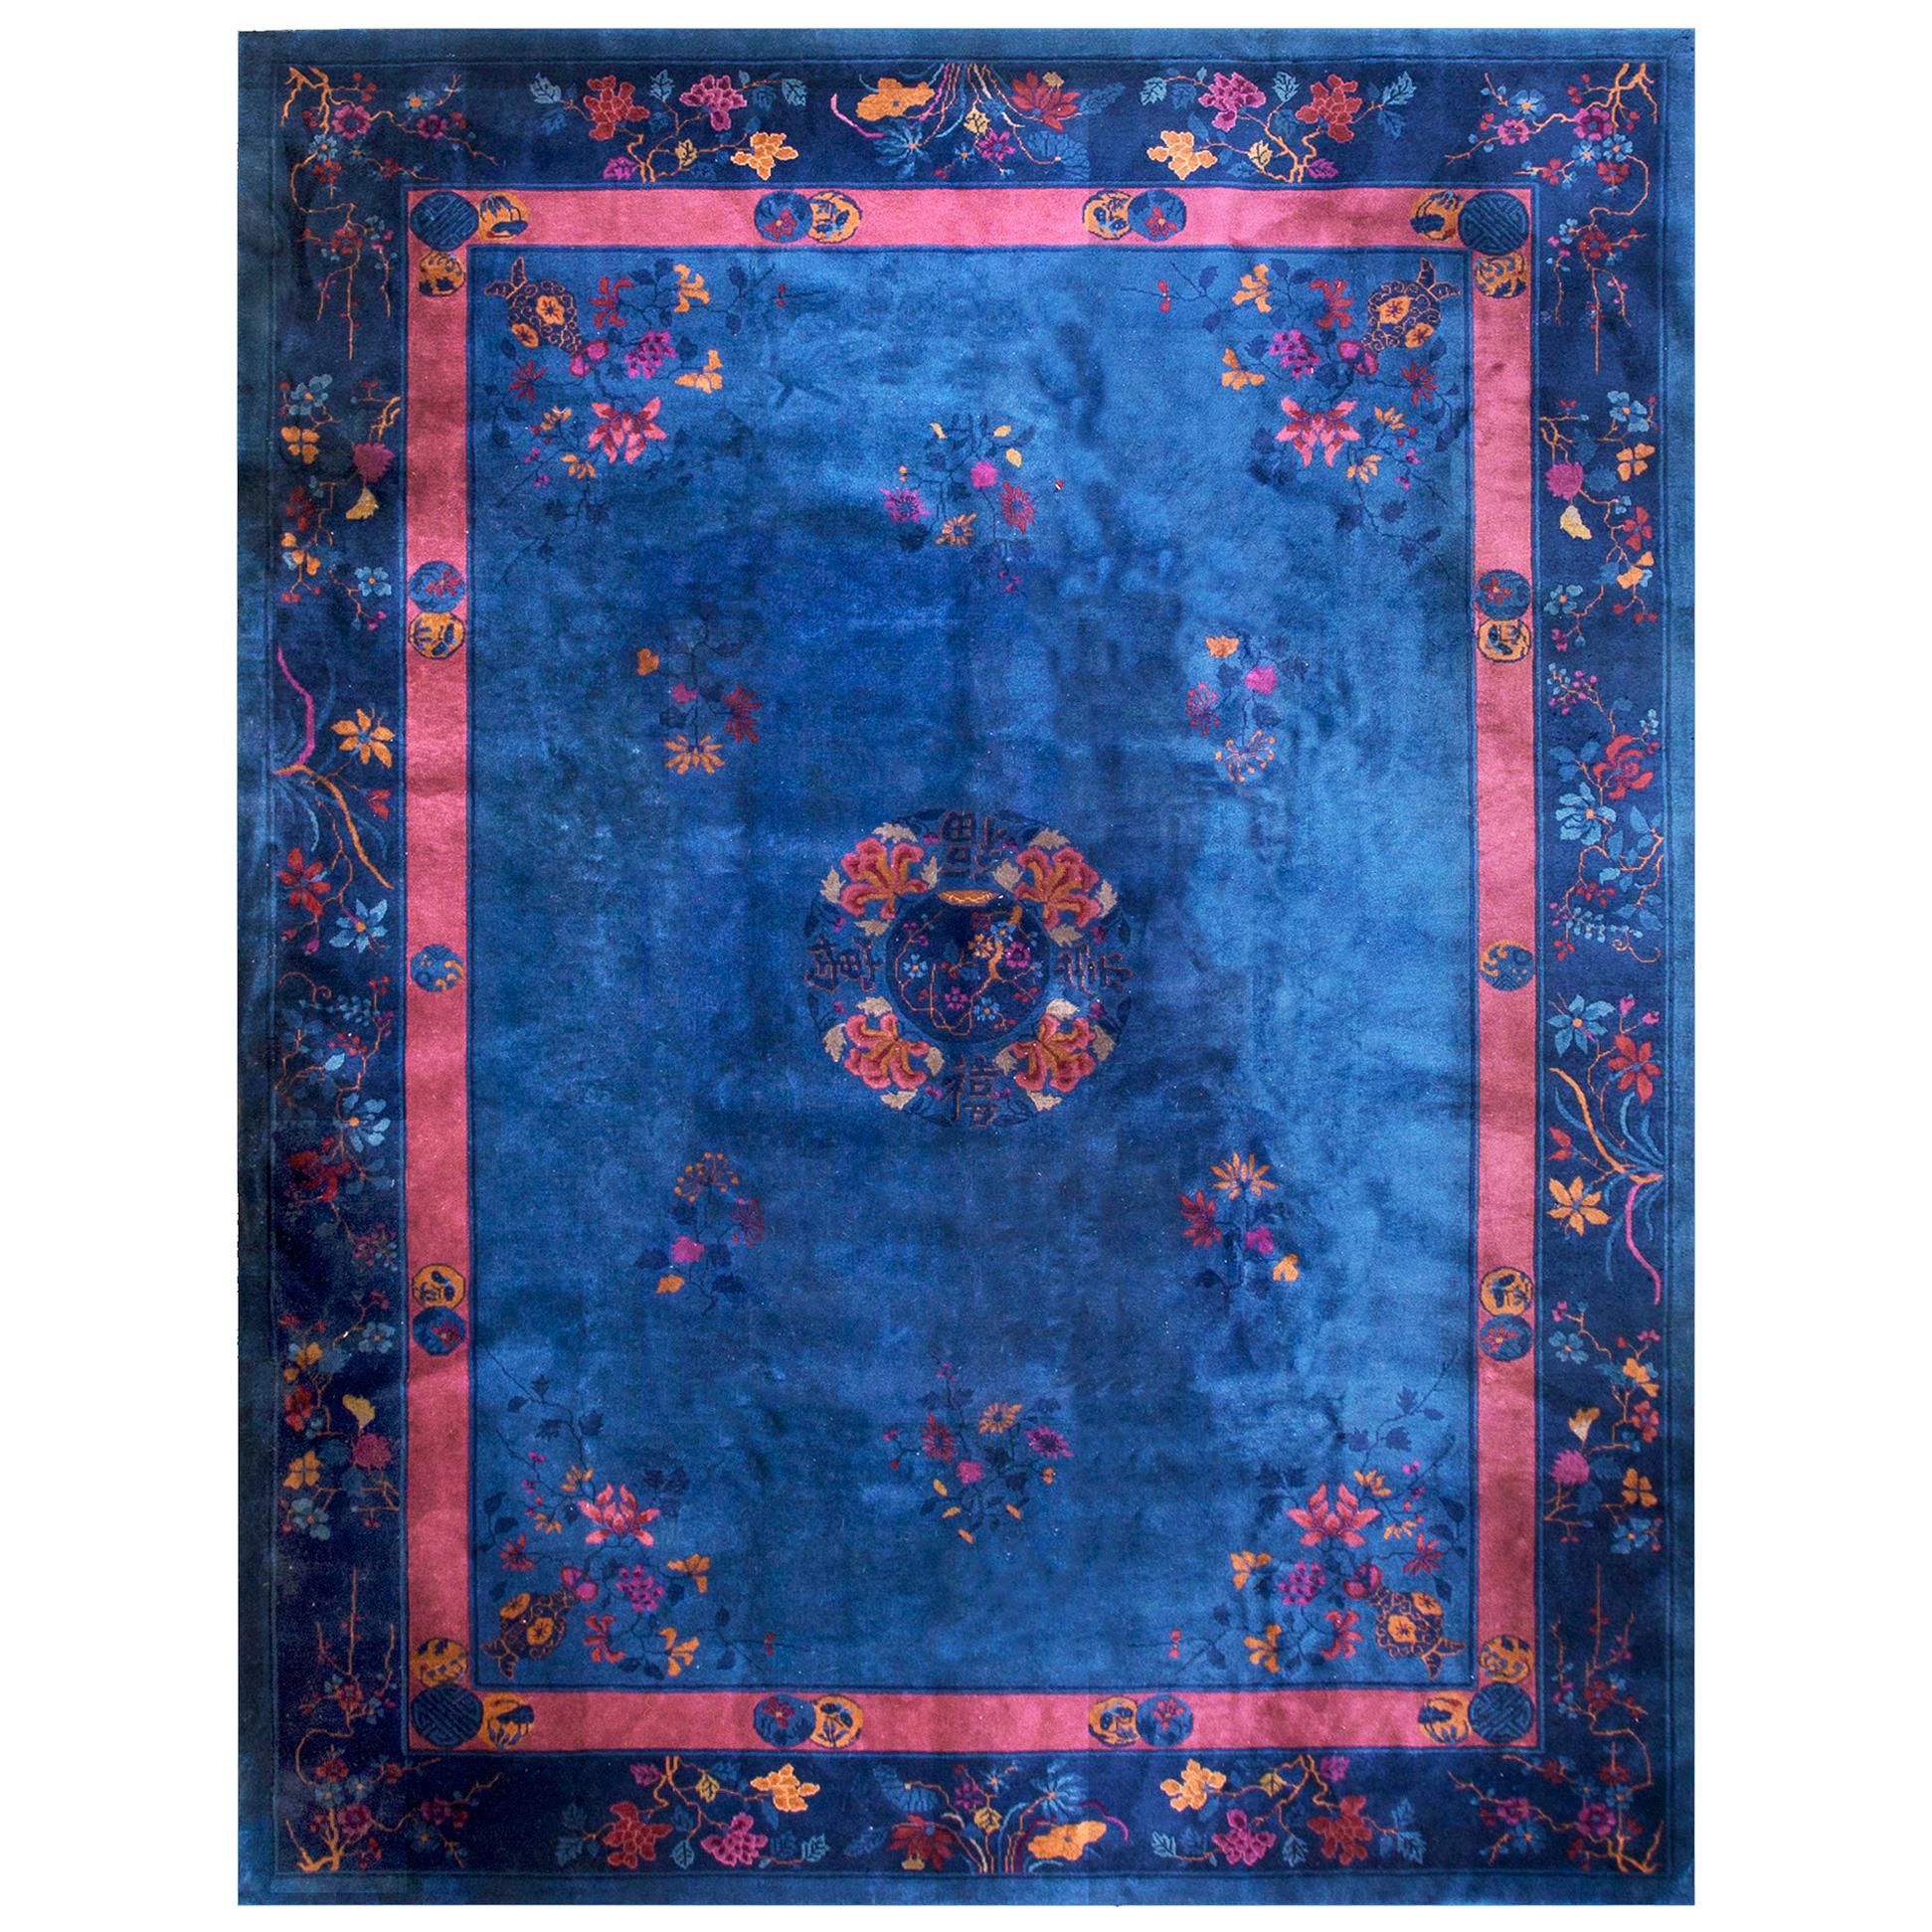 Antique Chinese Rug 9' 0" x 11' 8" 